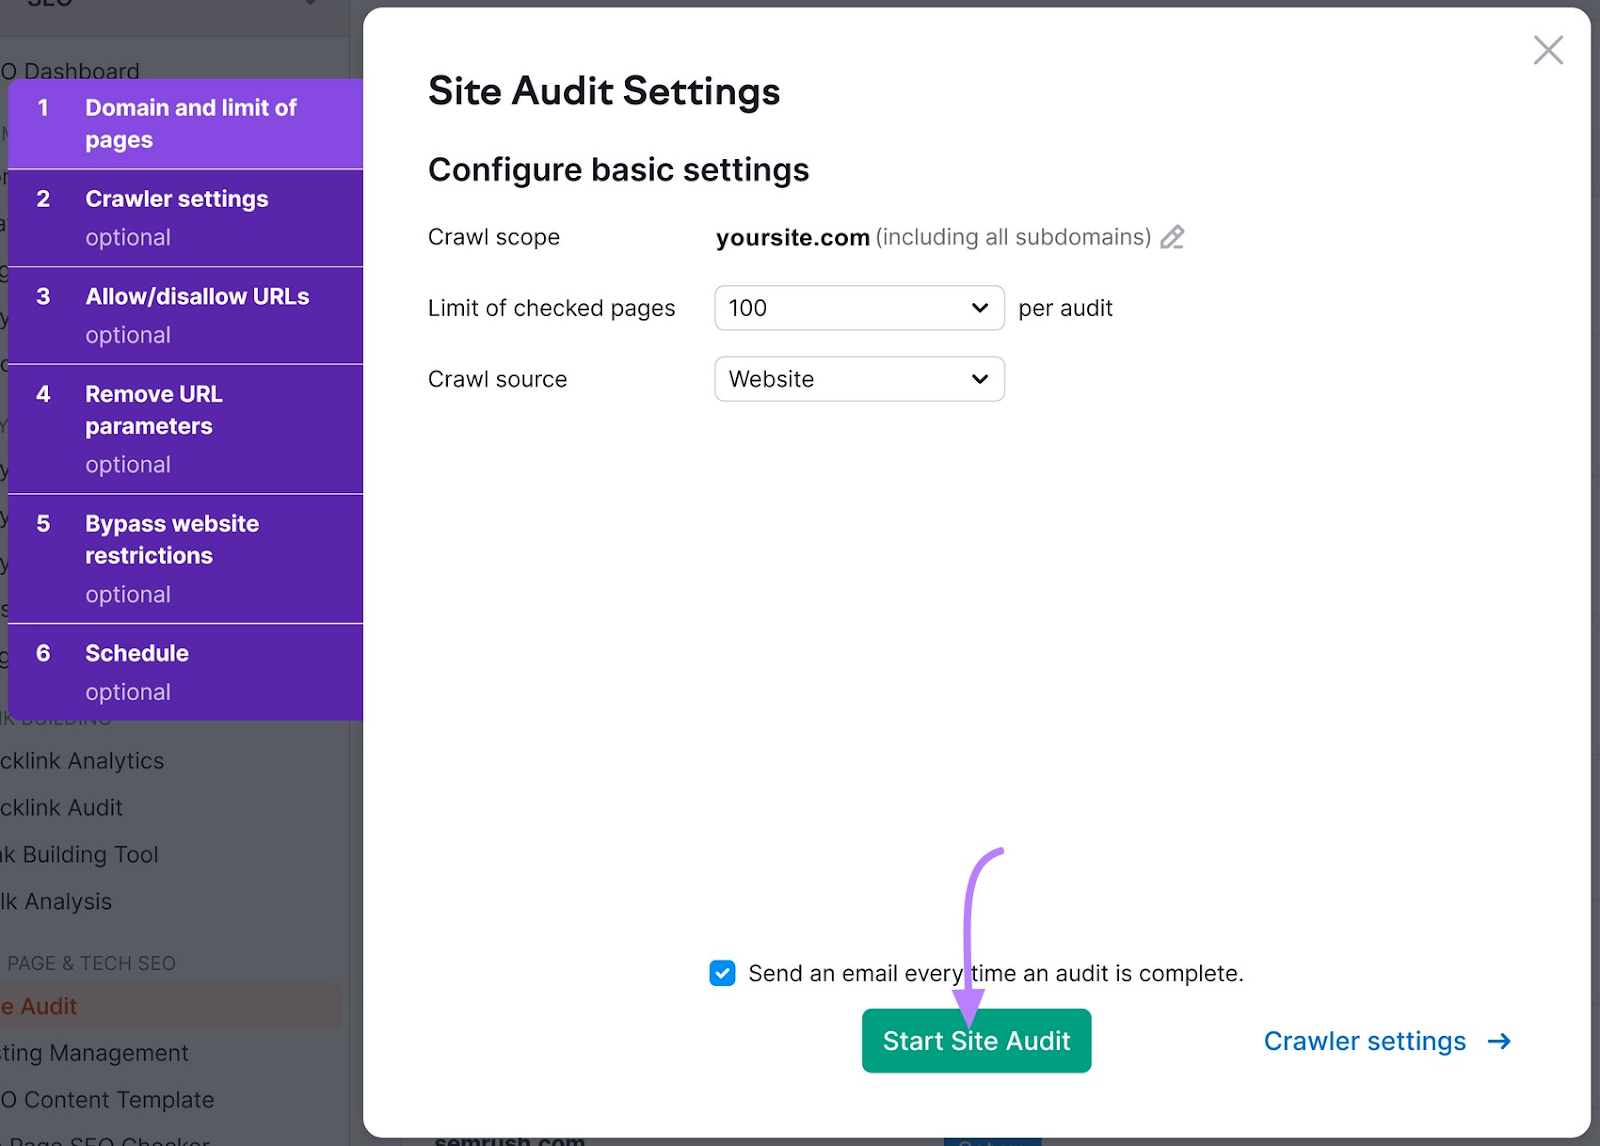 Site Audit Settings page with "Start Site Audit" button highlighted